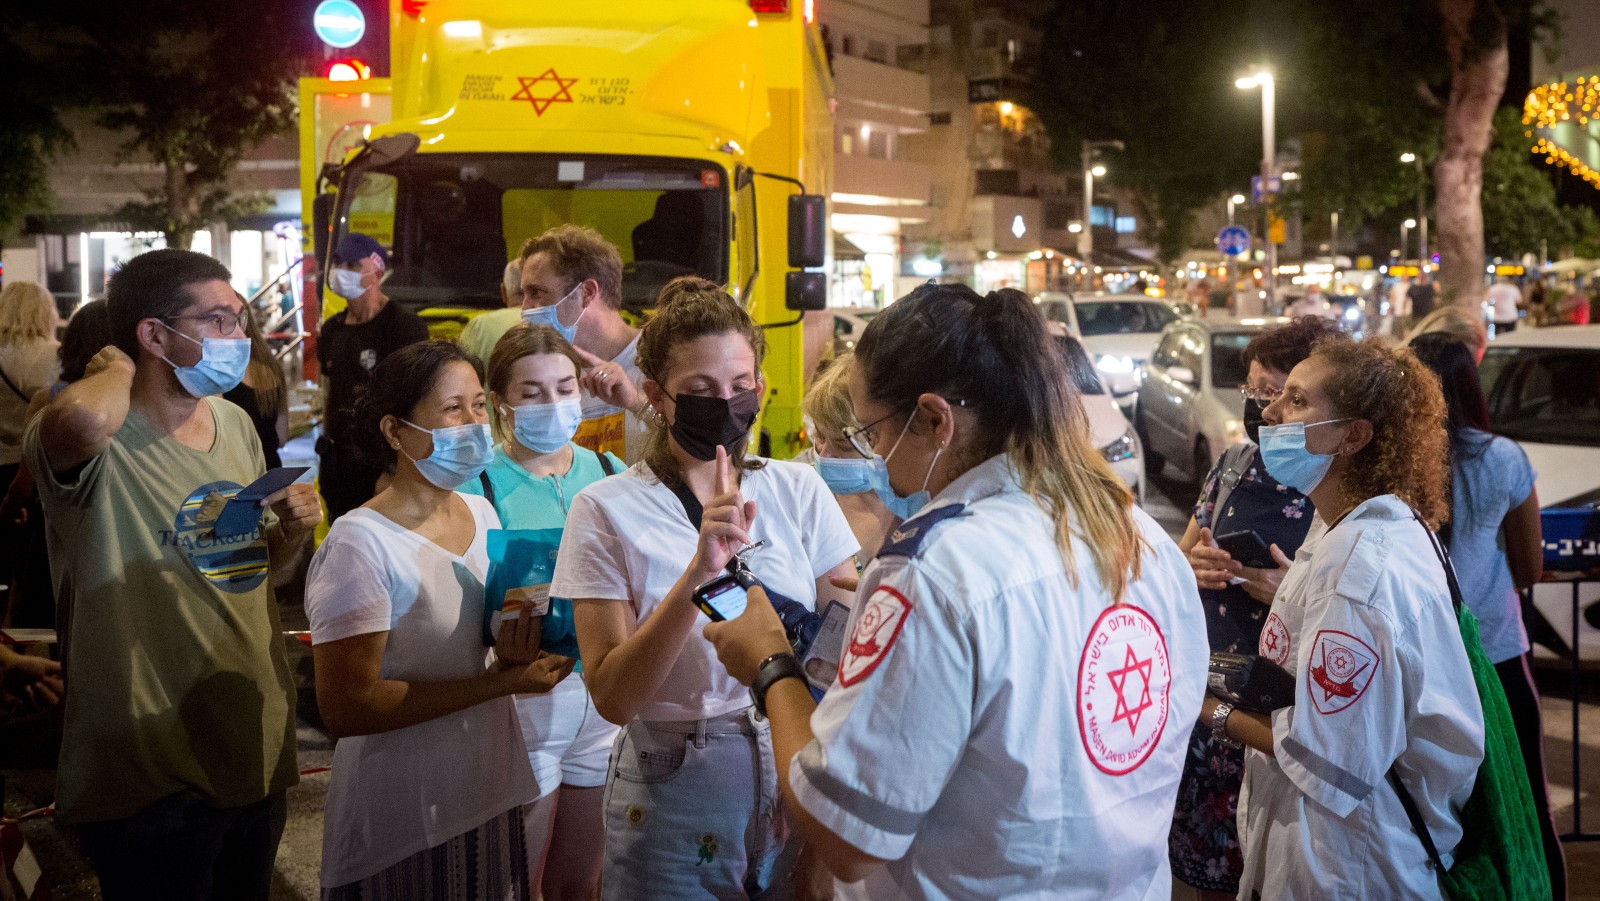 Israelis stand in line at a nighttime mobile Covid vaccination site at Dizengoff Square in Tel Aviv, August 14, 2021.  Photo by Miriam Alster/Flash90